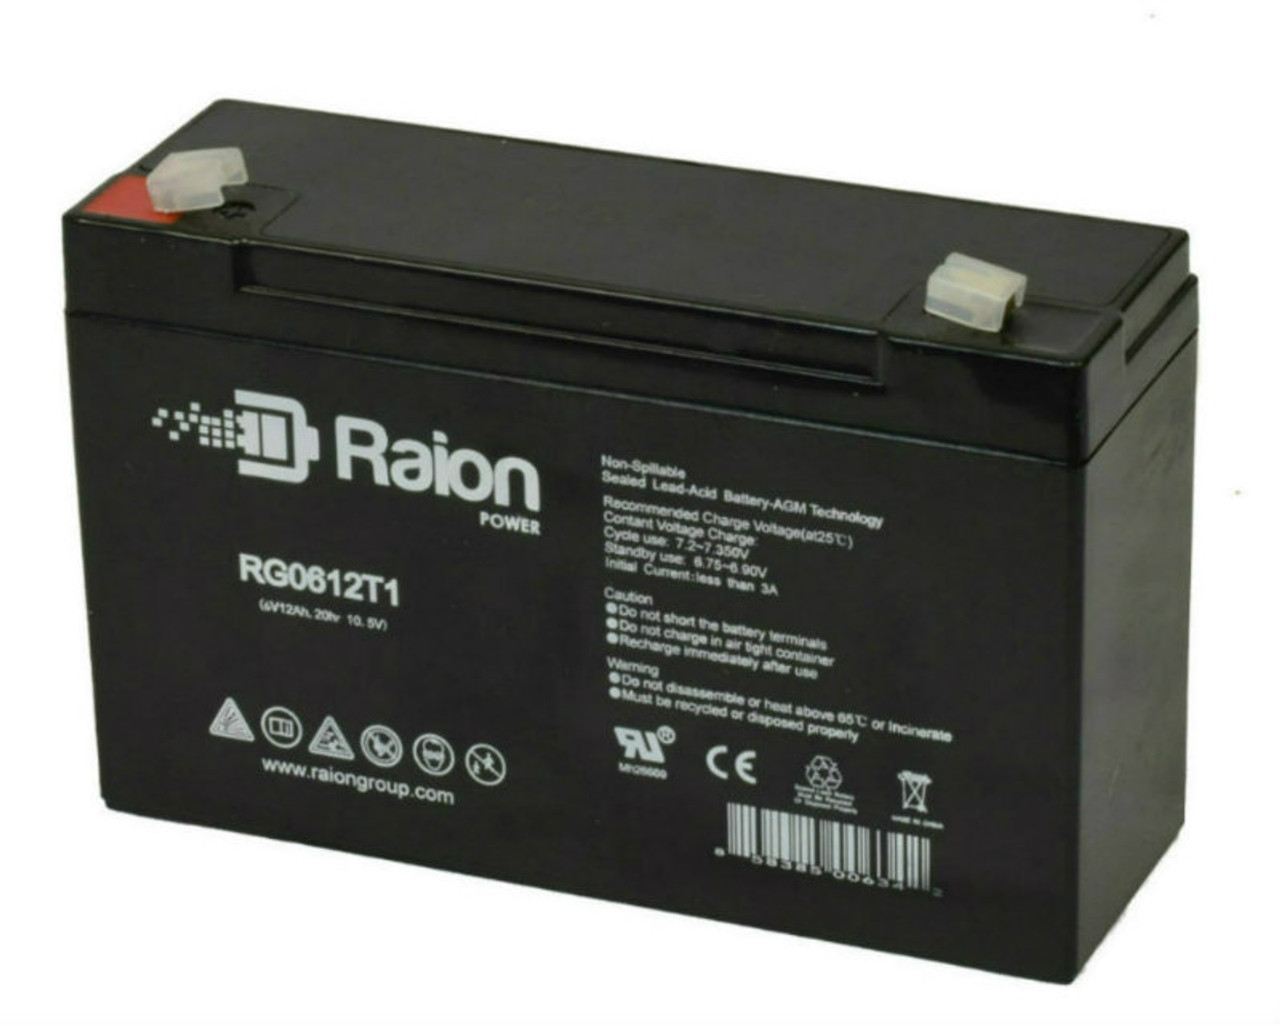 Raion Power RG06120T1 Replacement Battery for Kendall-Mcgaw 792 Infusion VIP Medical Equipment